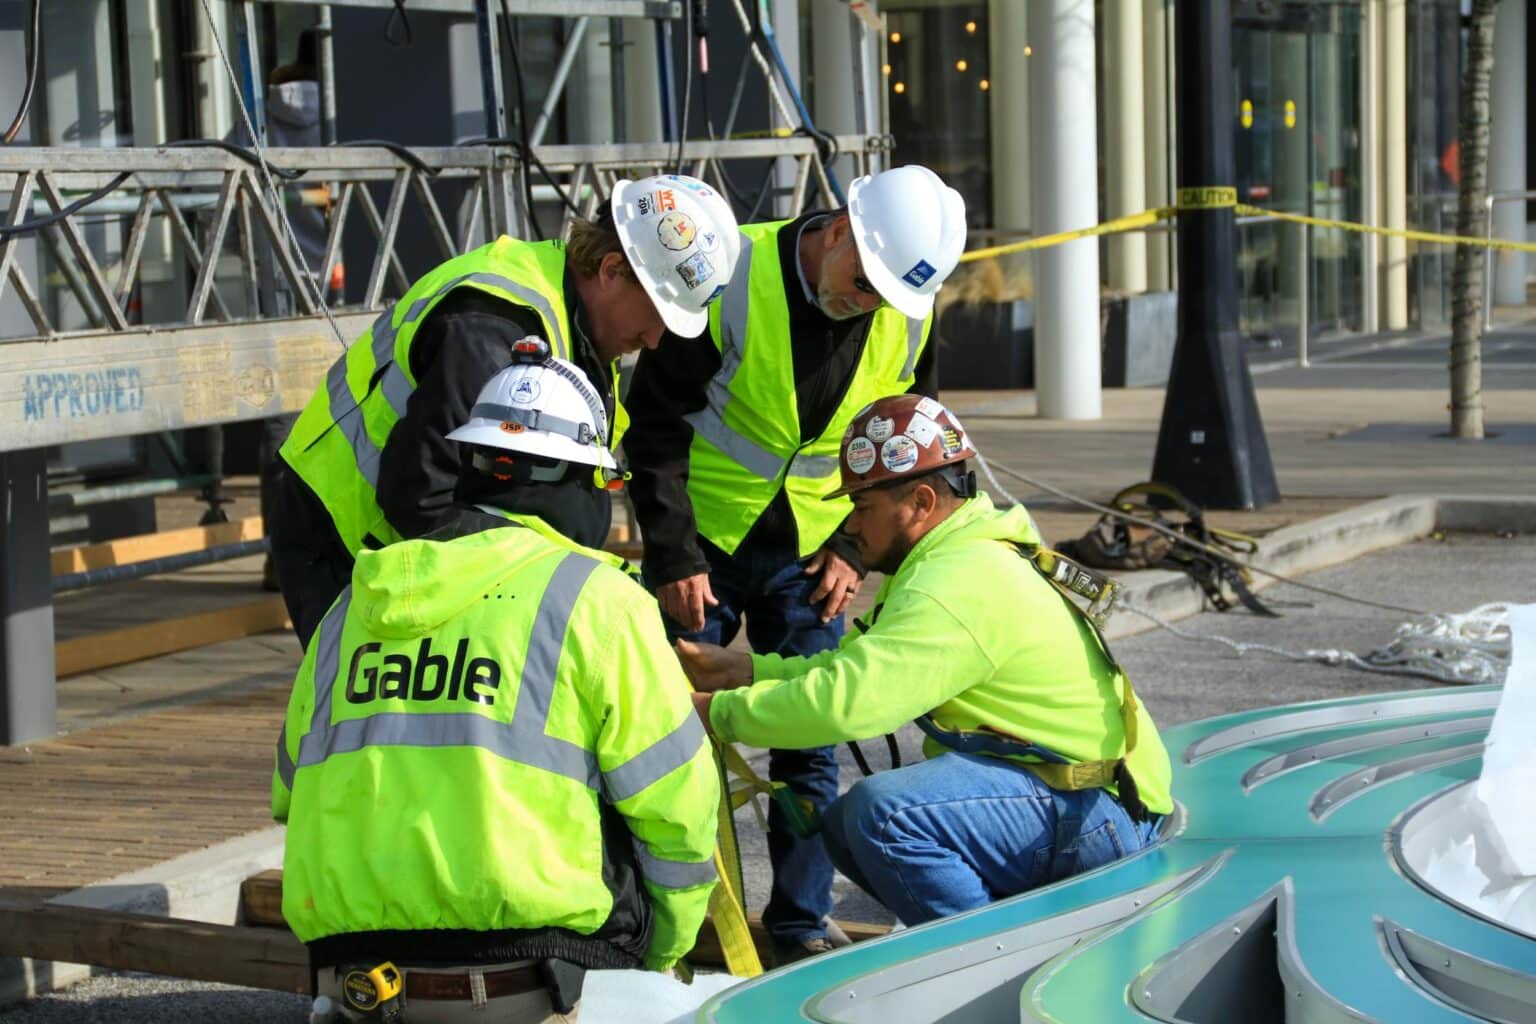 Gable On-Site Services